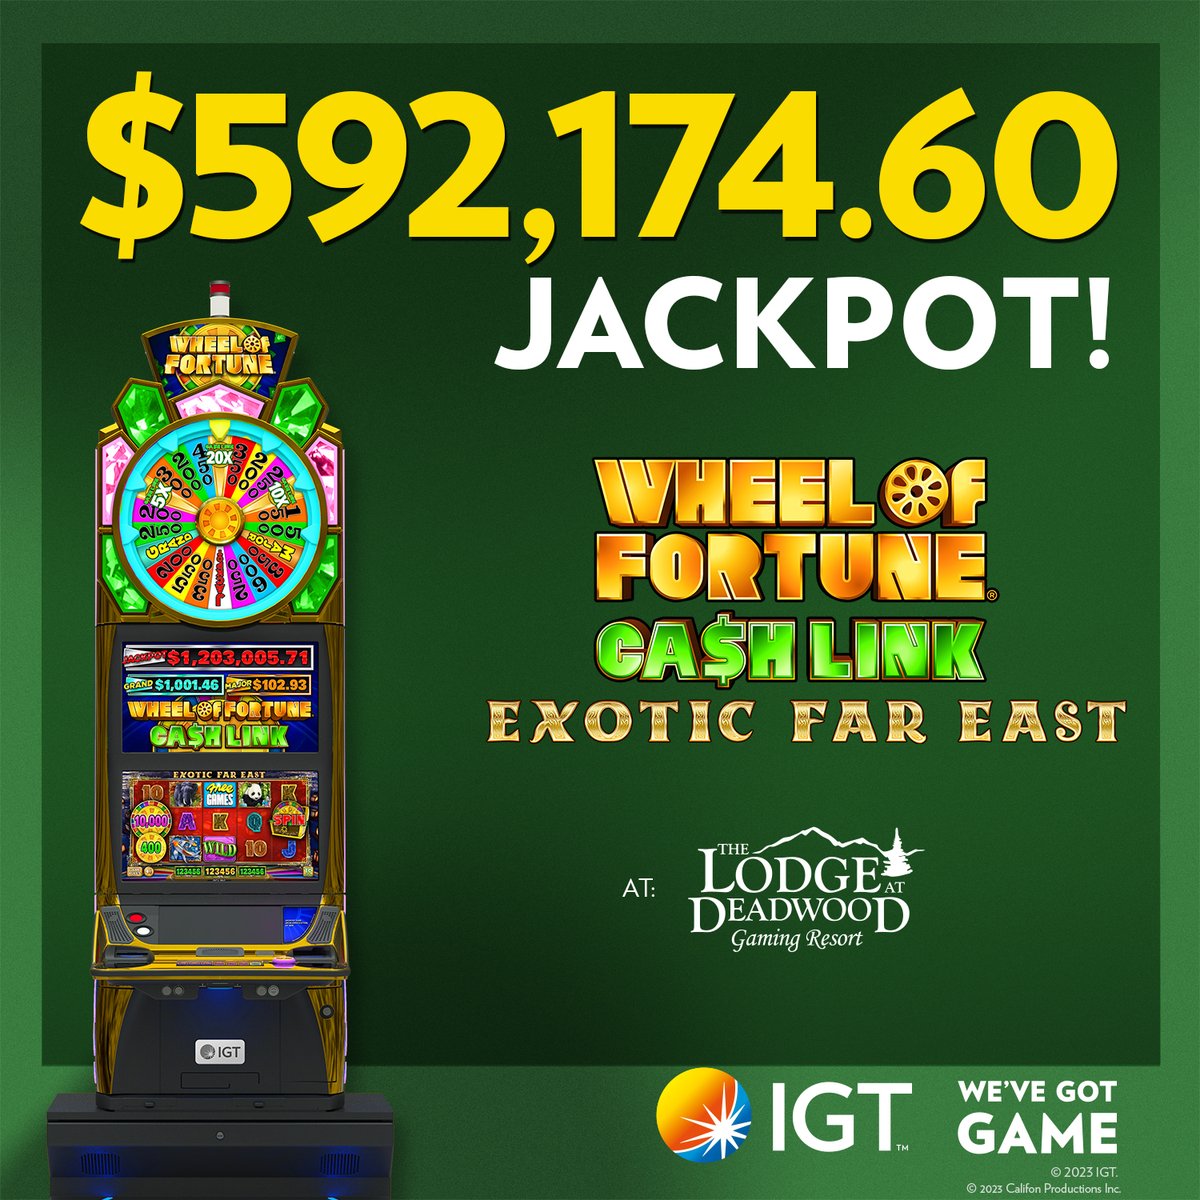 The @LodgeatDeadwood guest Jill A. has over a half million reasons to celebrate. &#129395; She hit this EXCITING jackpot on Wheel of Fortune Cash Link Exotic Far East Slots for $592,174.60 on a $5.25 max bet! Congratulations, Jill! &#127881;

